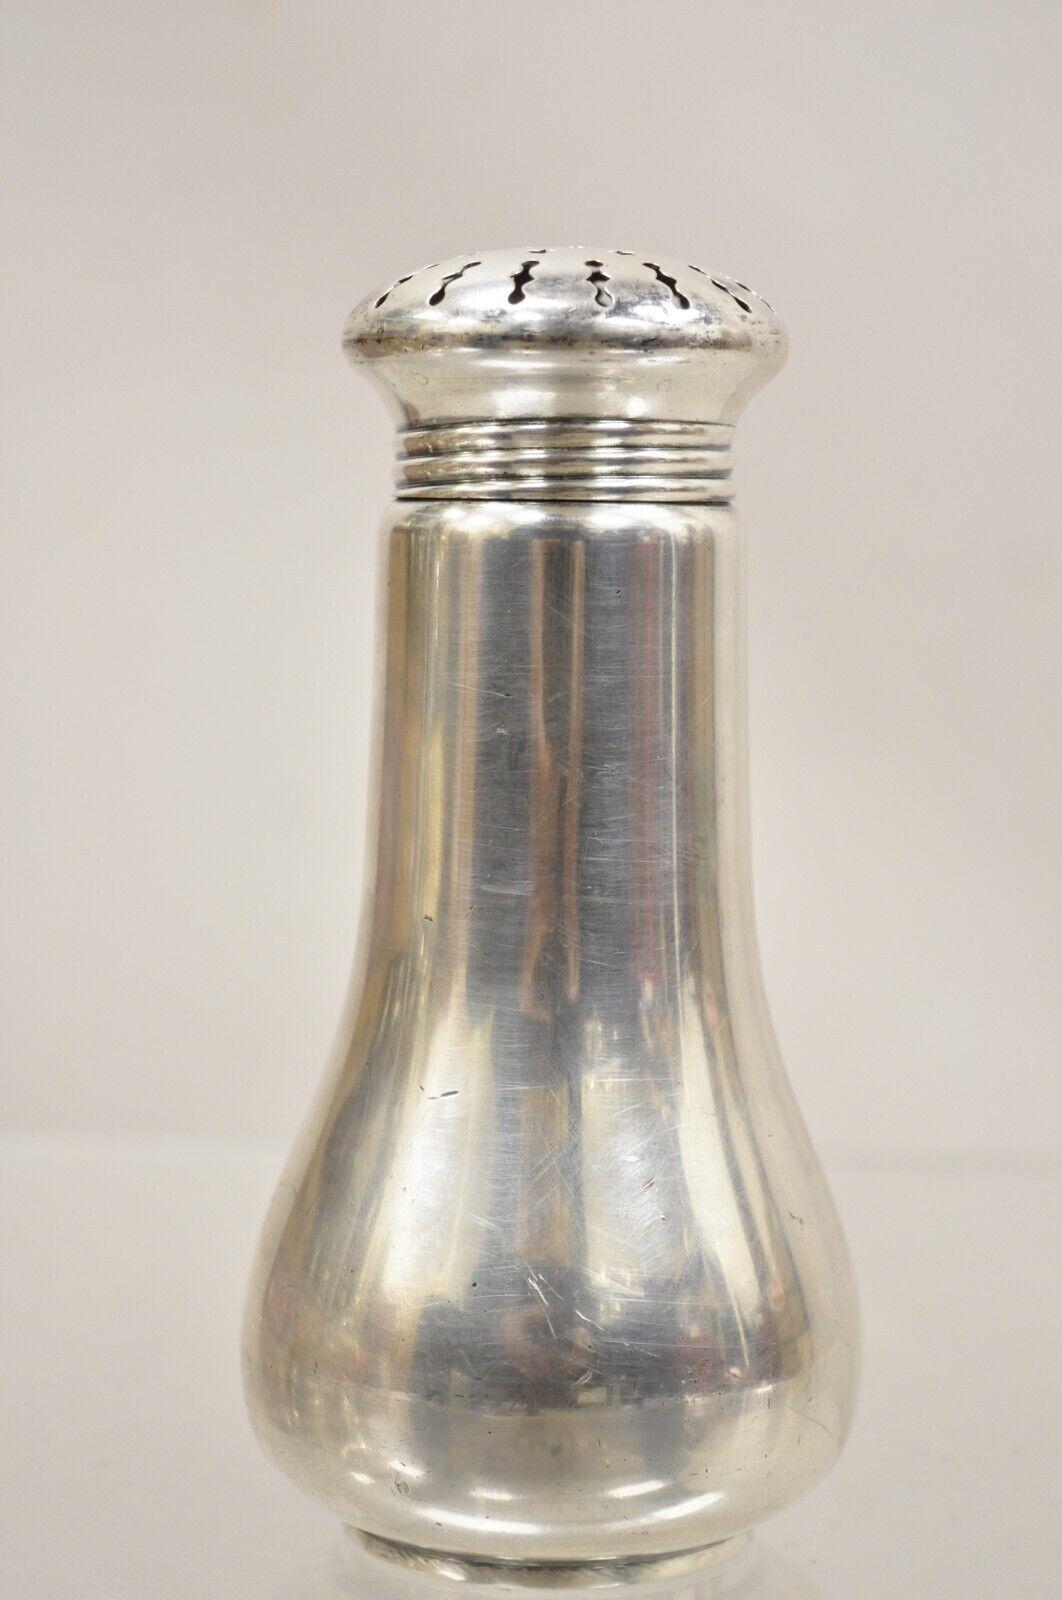 Antique Wilcox SP Co. 4281 Silver Plated Seasoning Spice Shaker 